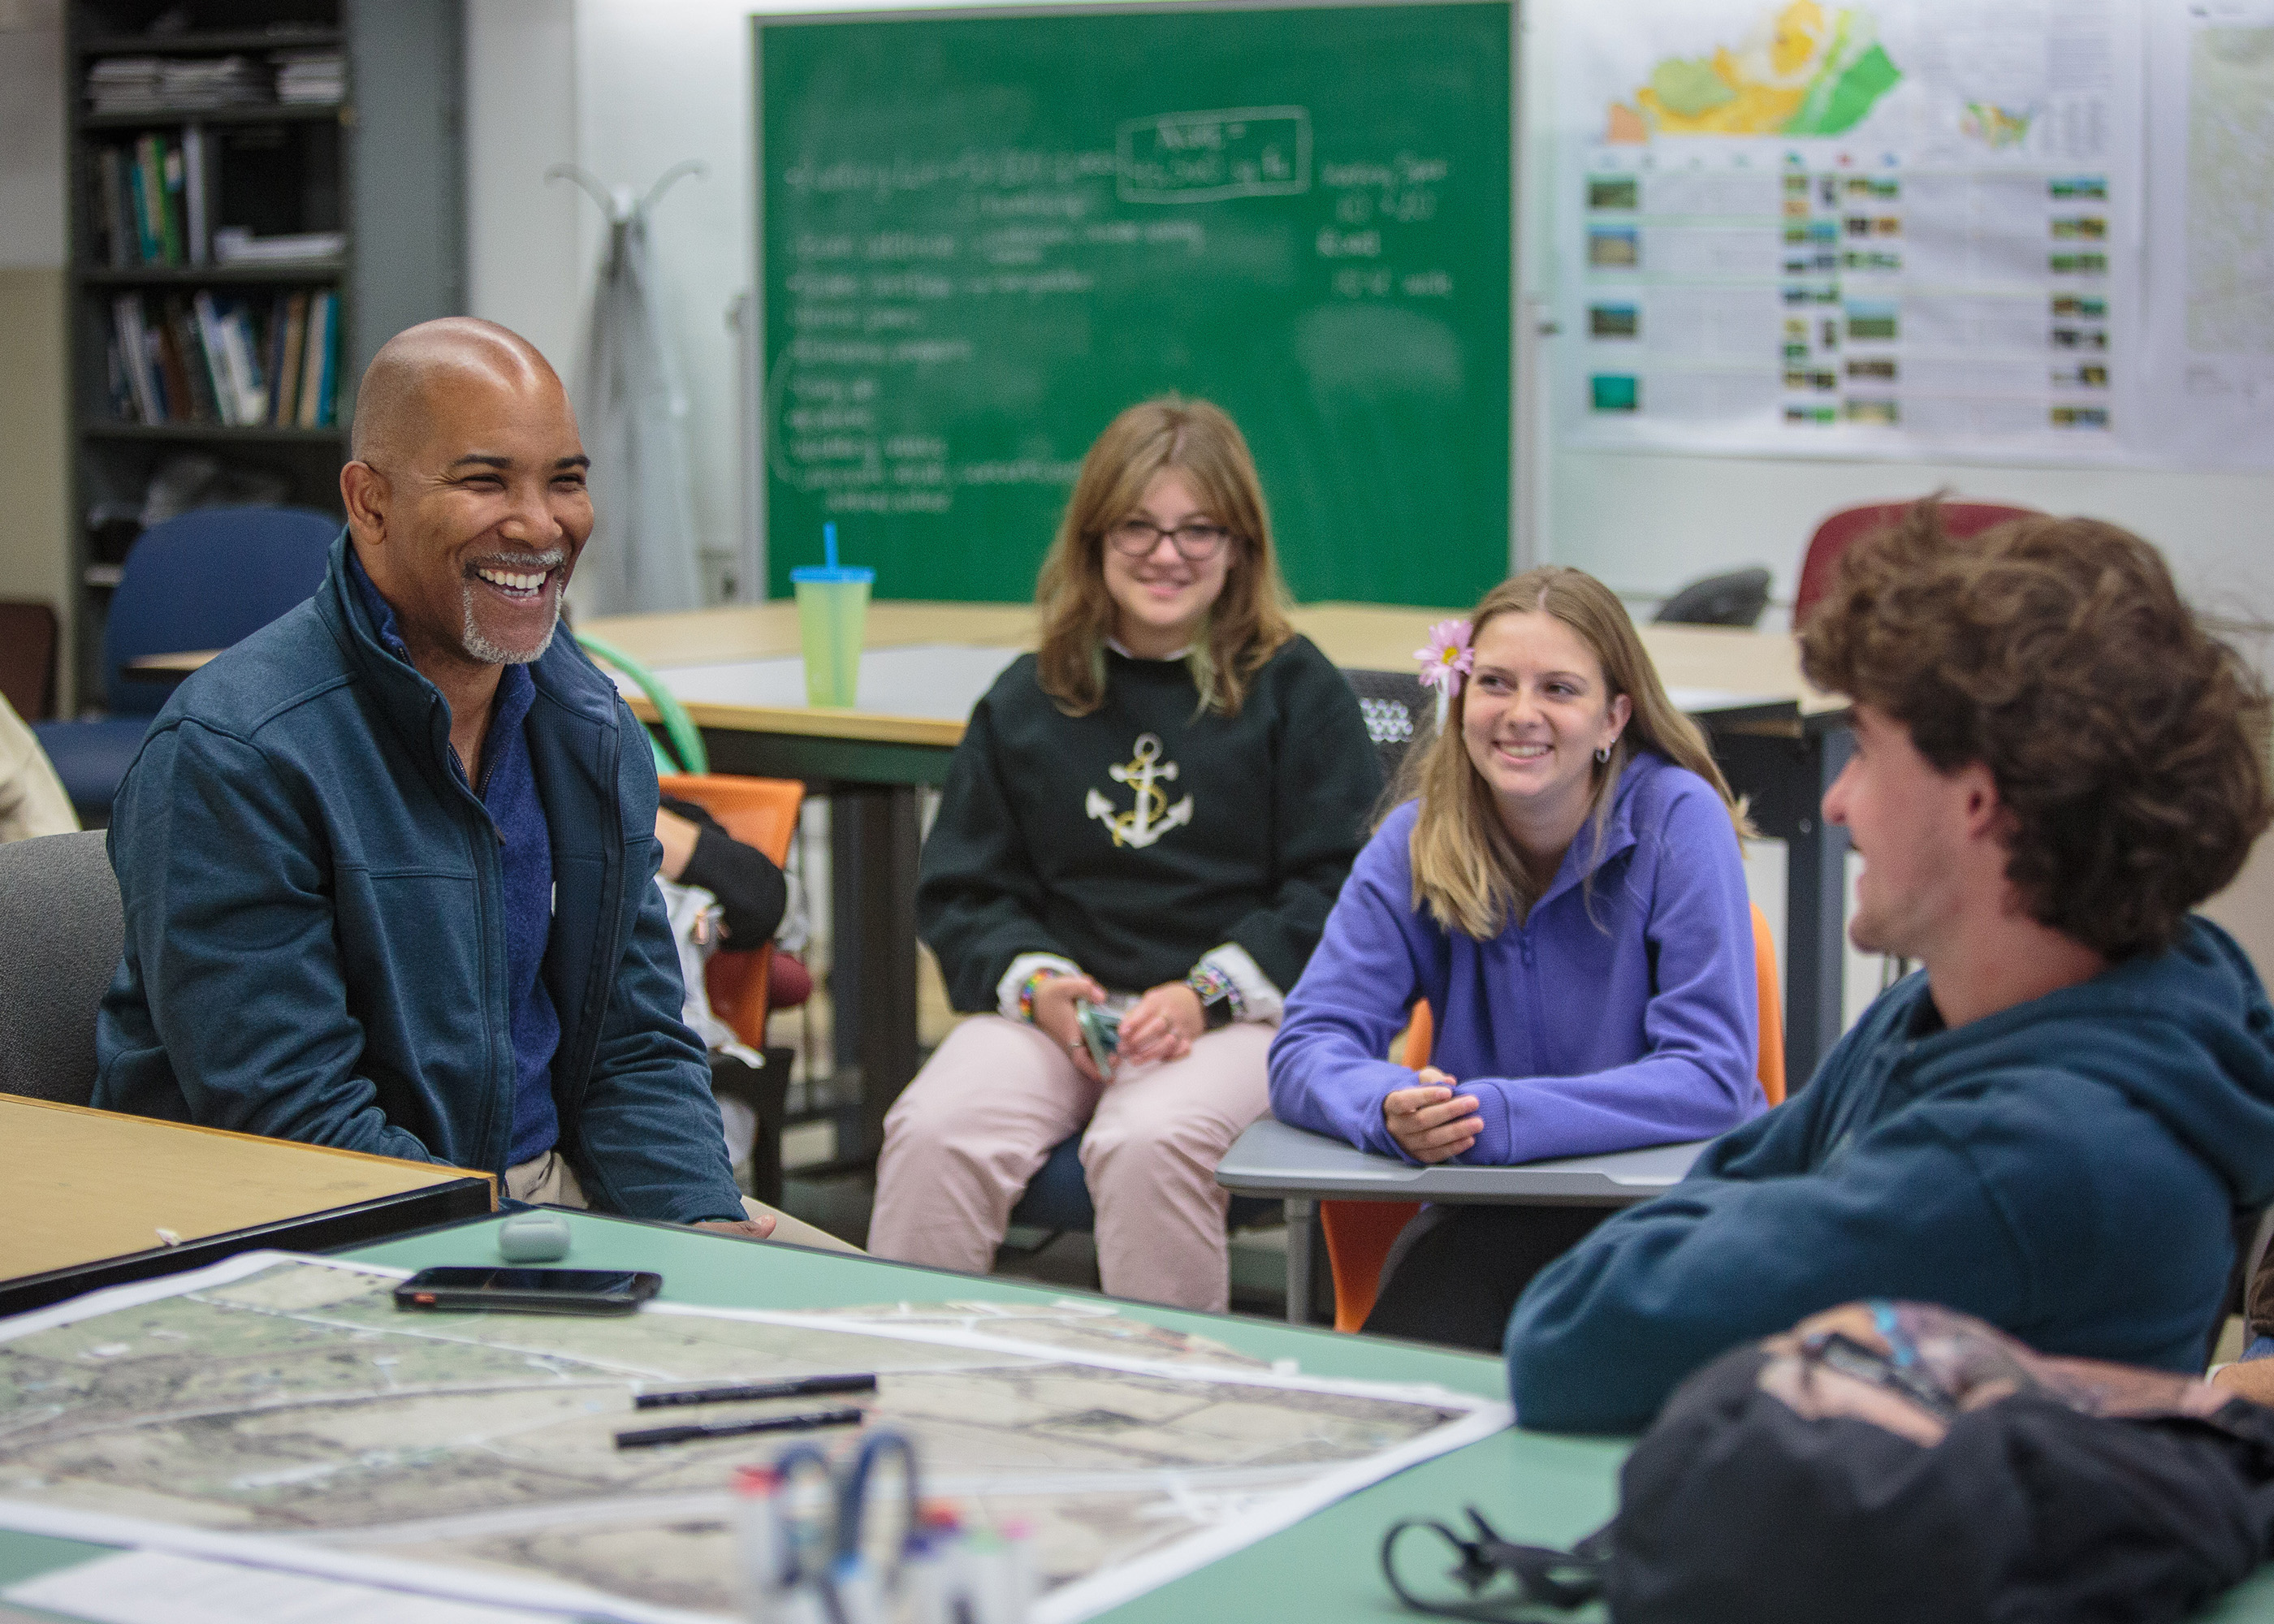 ASLA CEO Torey Carter-Conneen visits our studio and students.